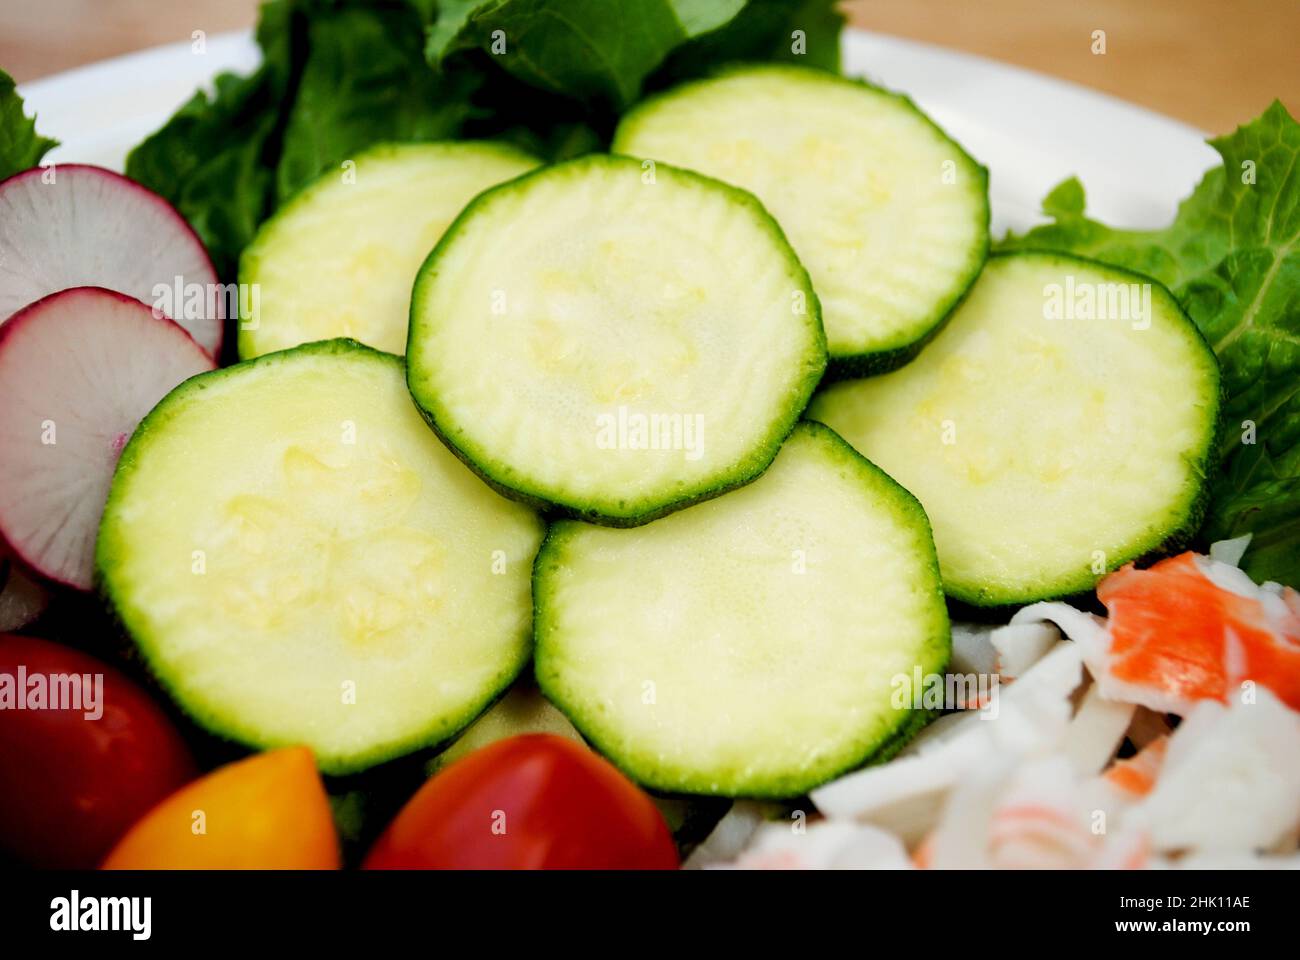 Close-up of Raw Zucchini as Part of a Raw Fresh Salad Stock Photo